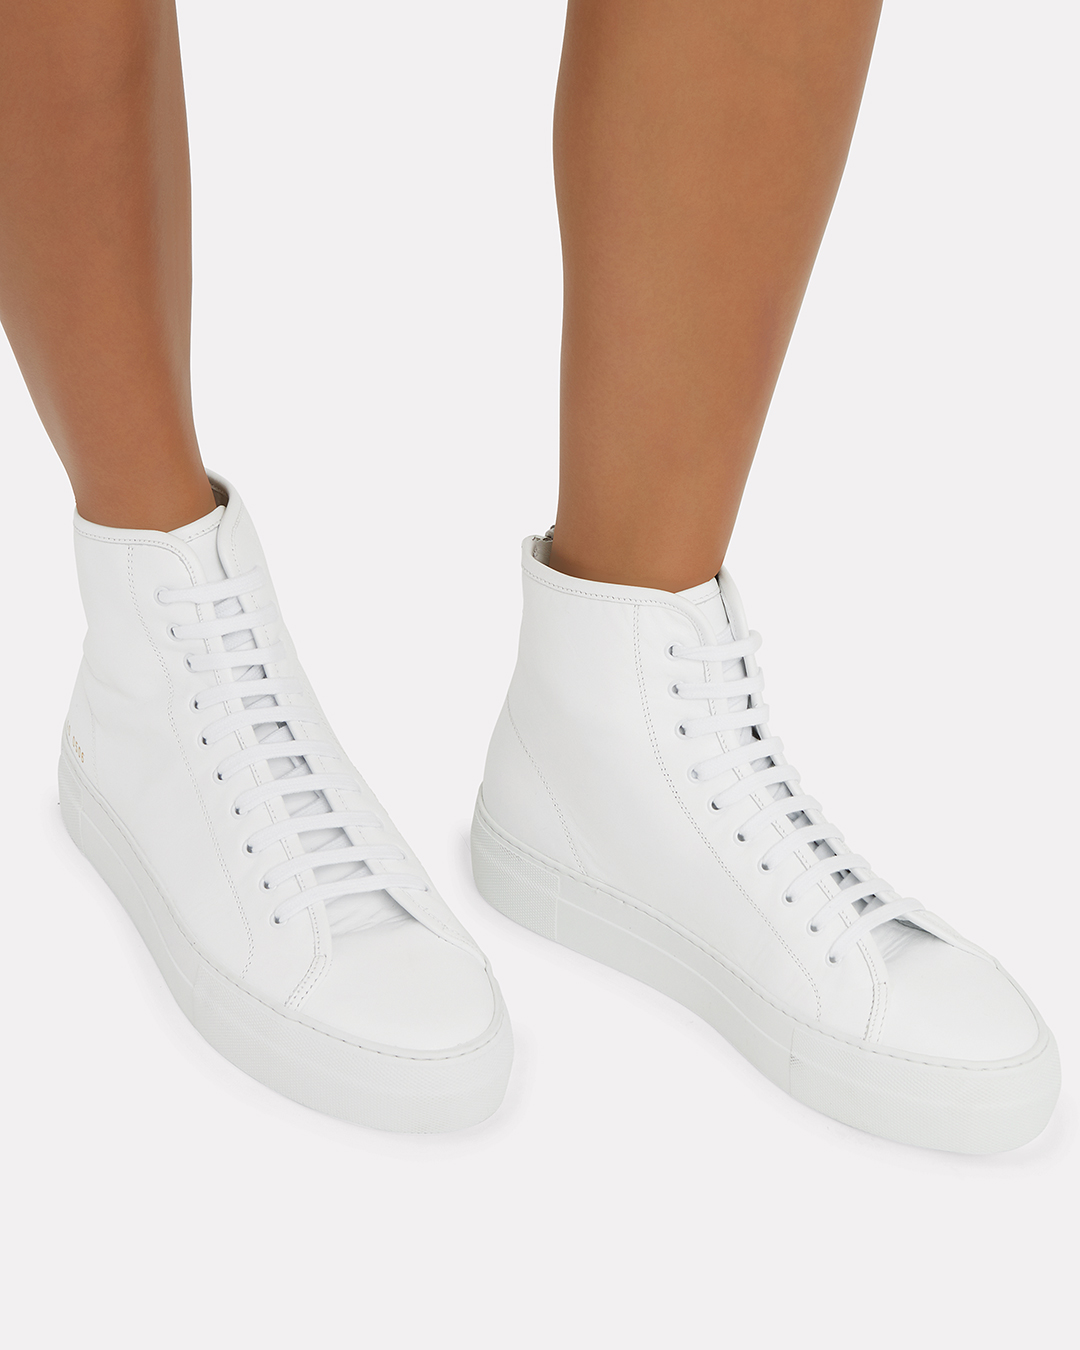 Tournament High-Top White Sneakers | INTERMIX®